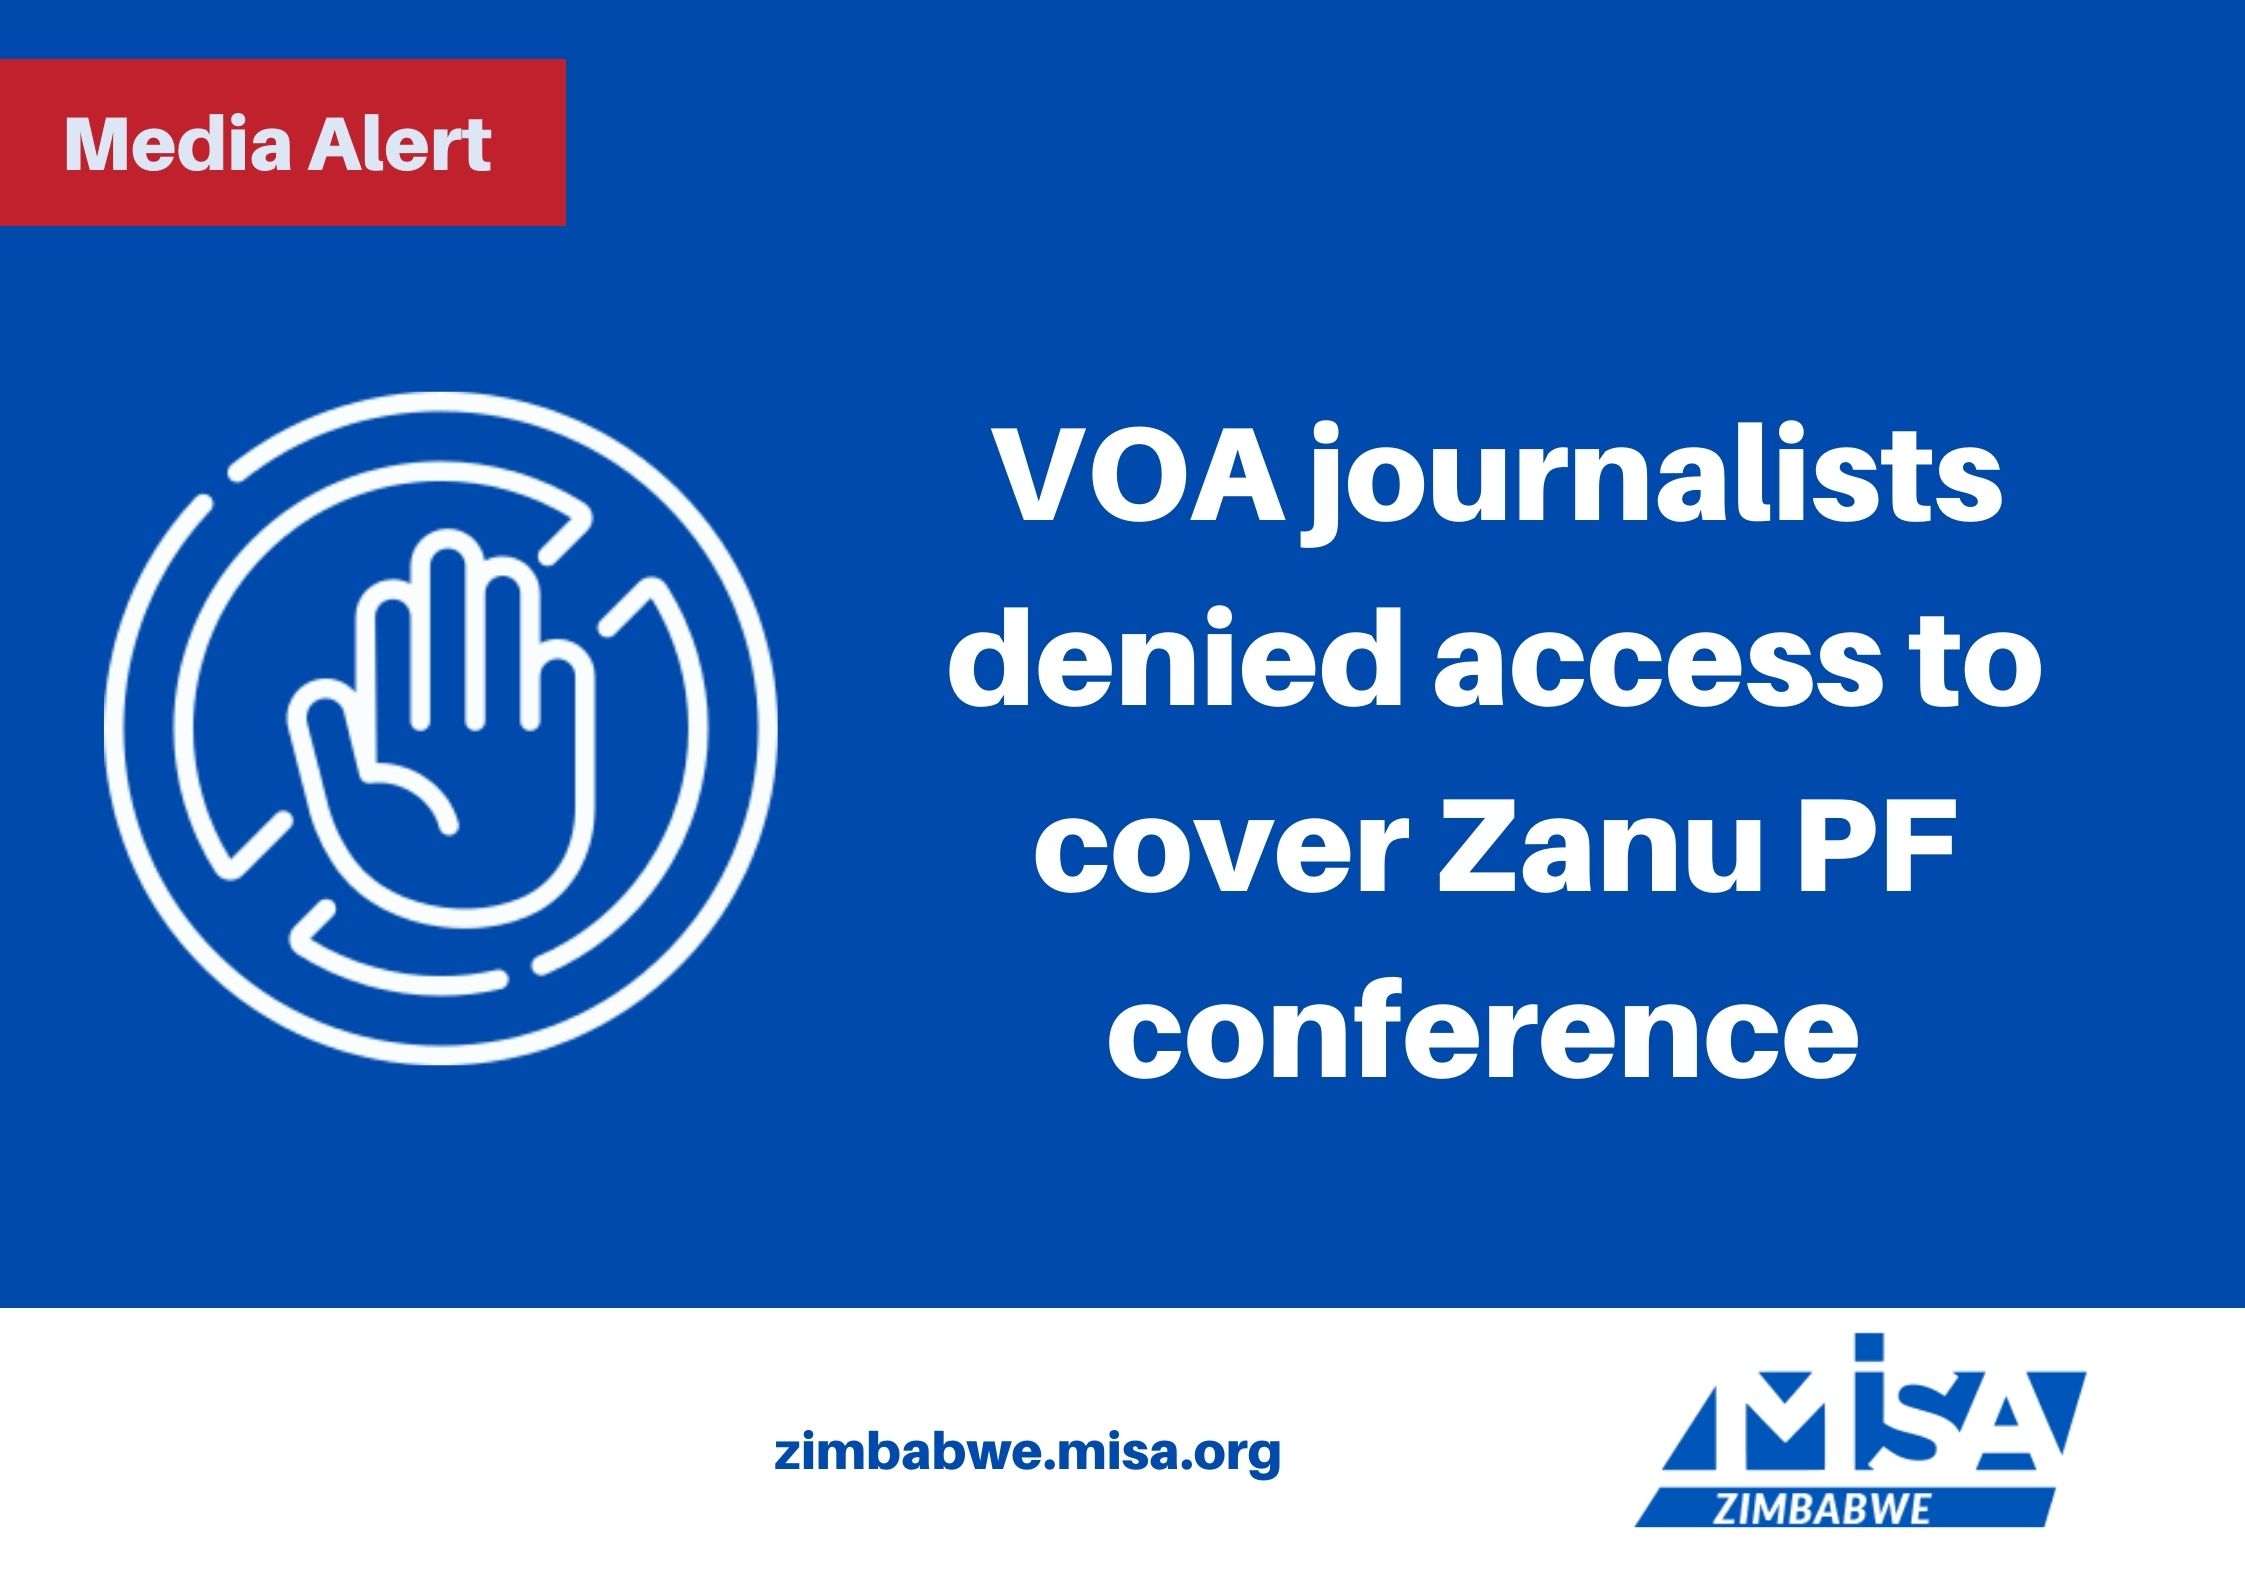 VOA journalists denied access to cover Zanu PF conference